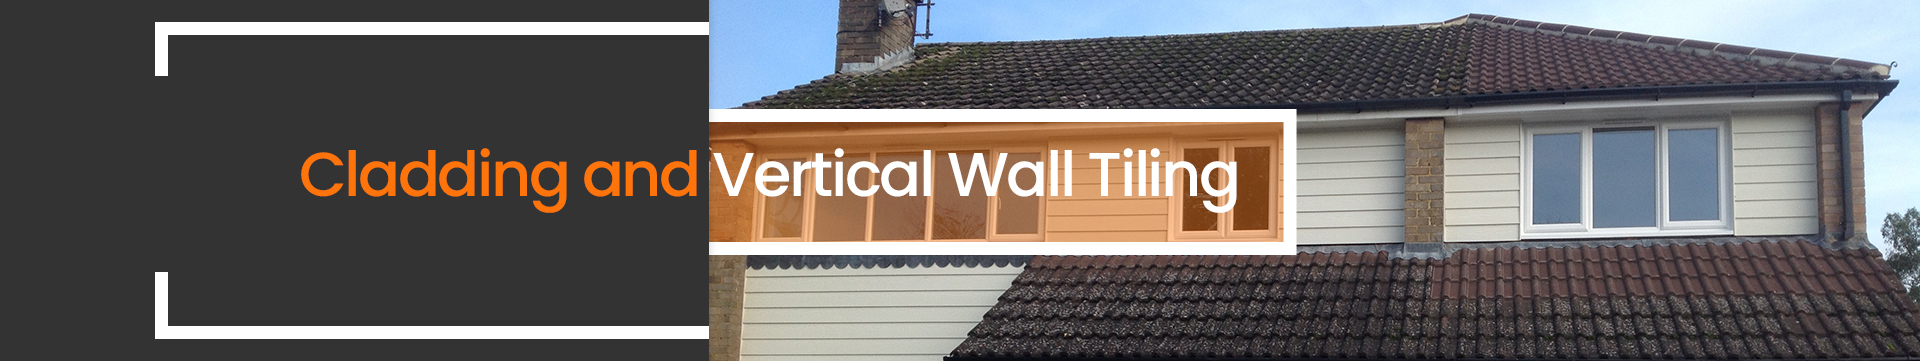 Cladding and Vertical Wall Tiling banner Facelift